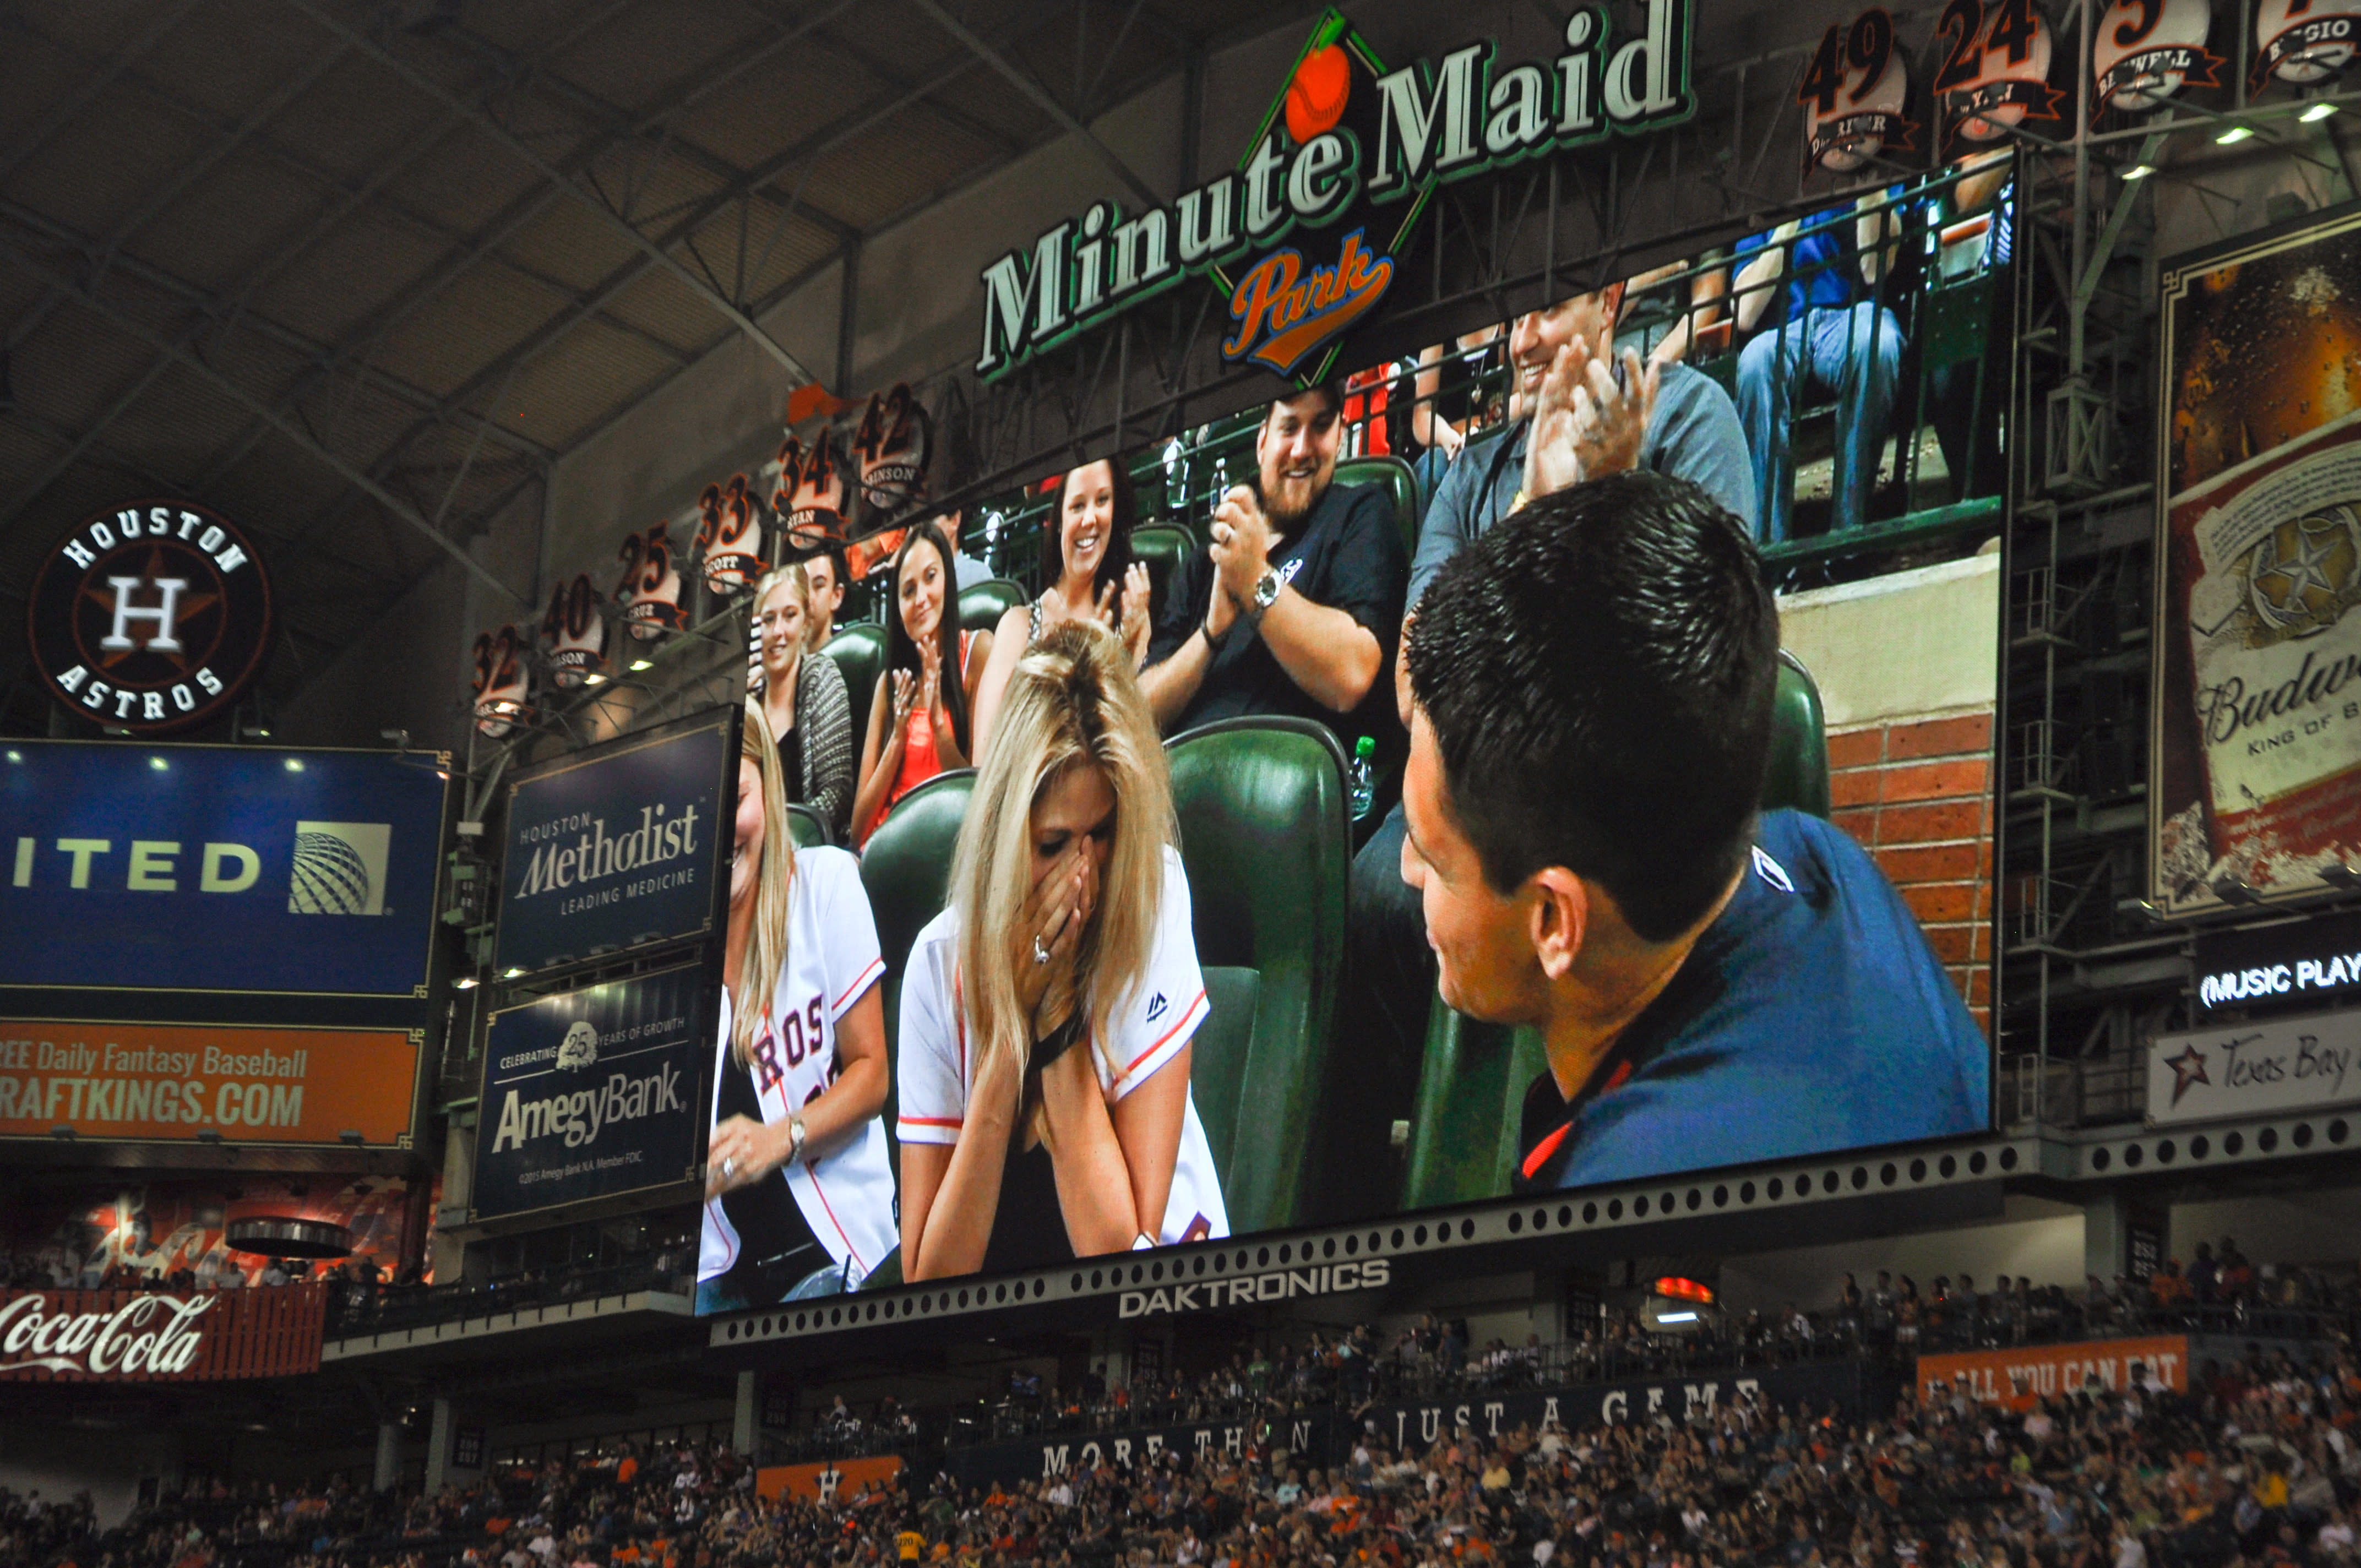 Marriage Proposal on Minute Maid Park Big Screen